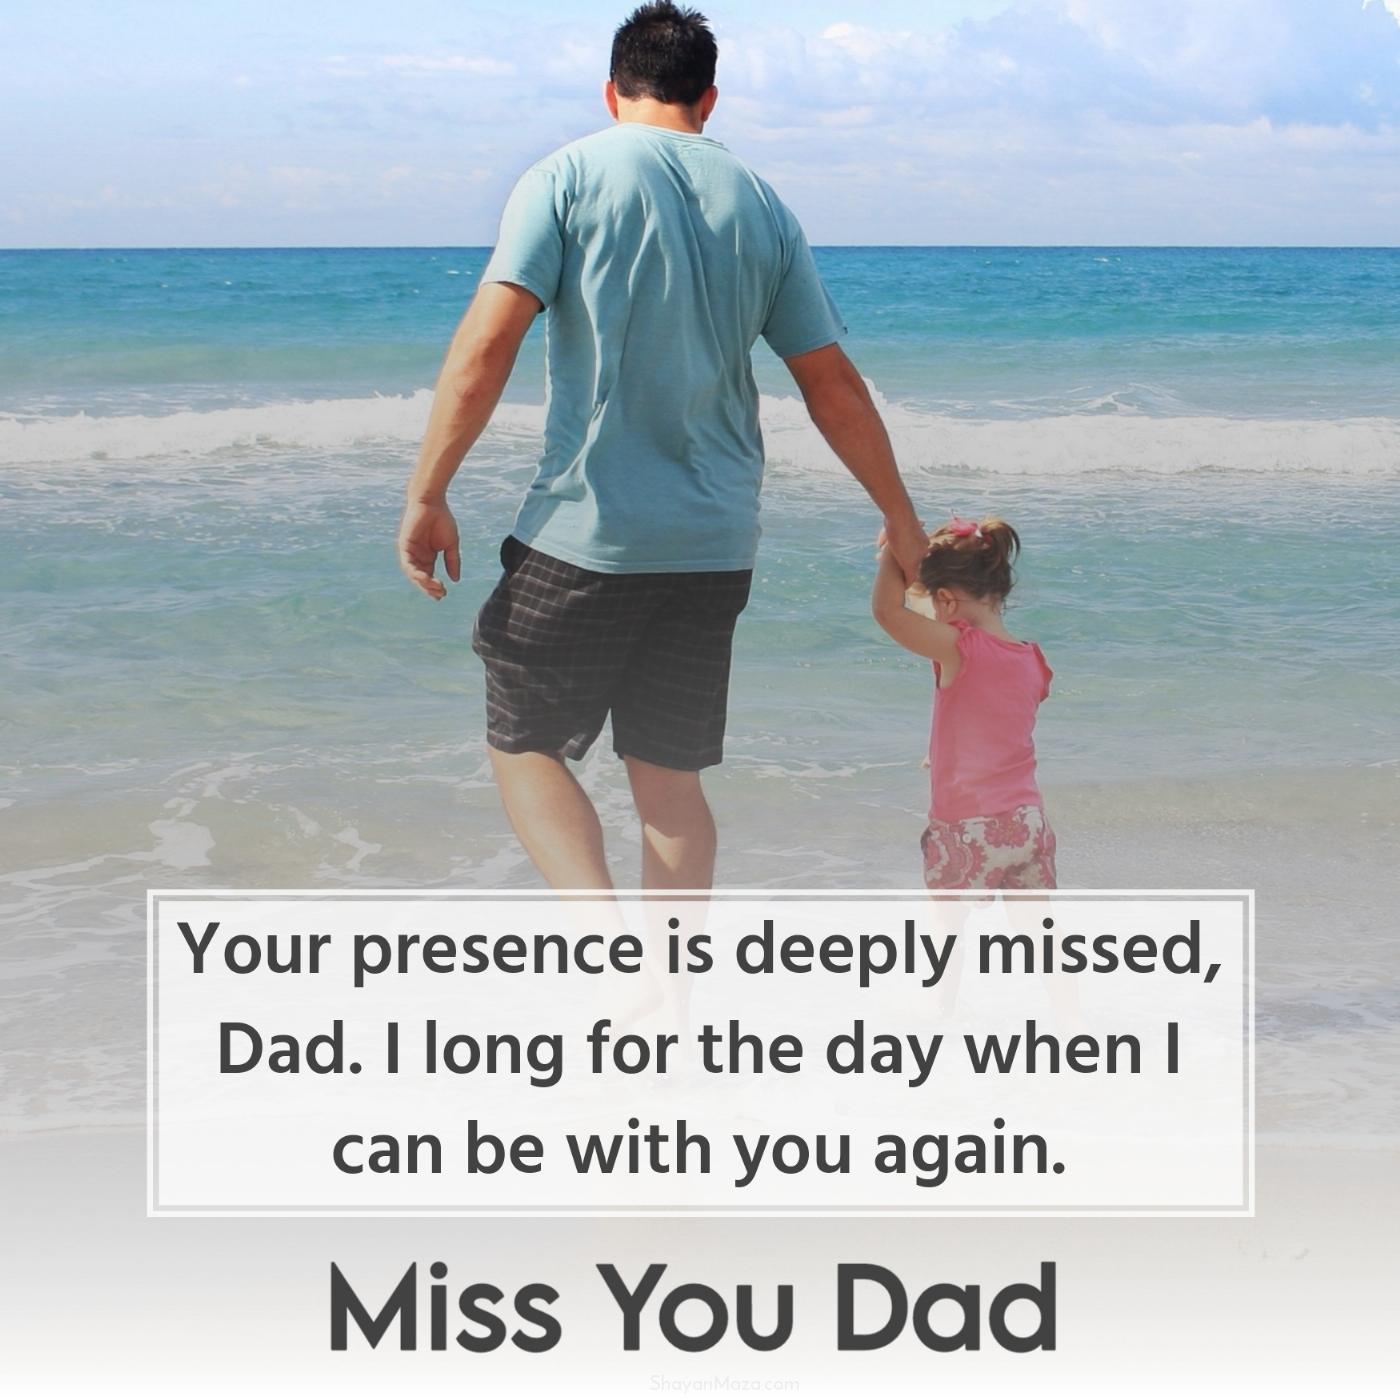 Your presence is deeply missed Dad